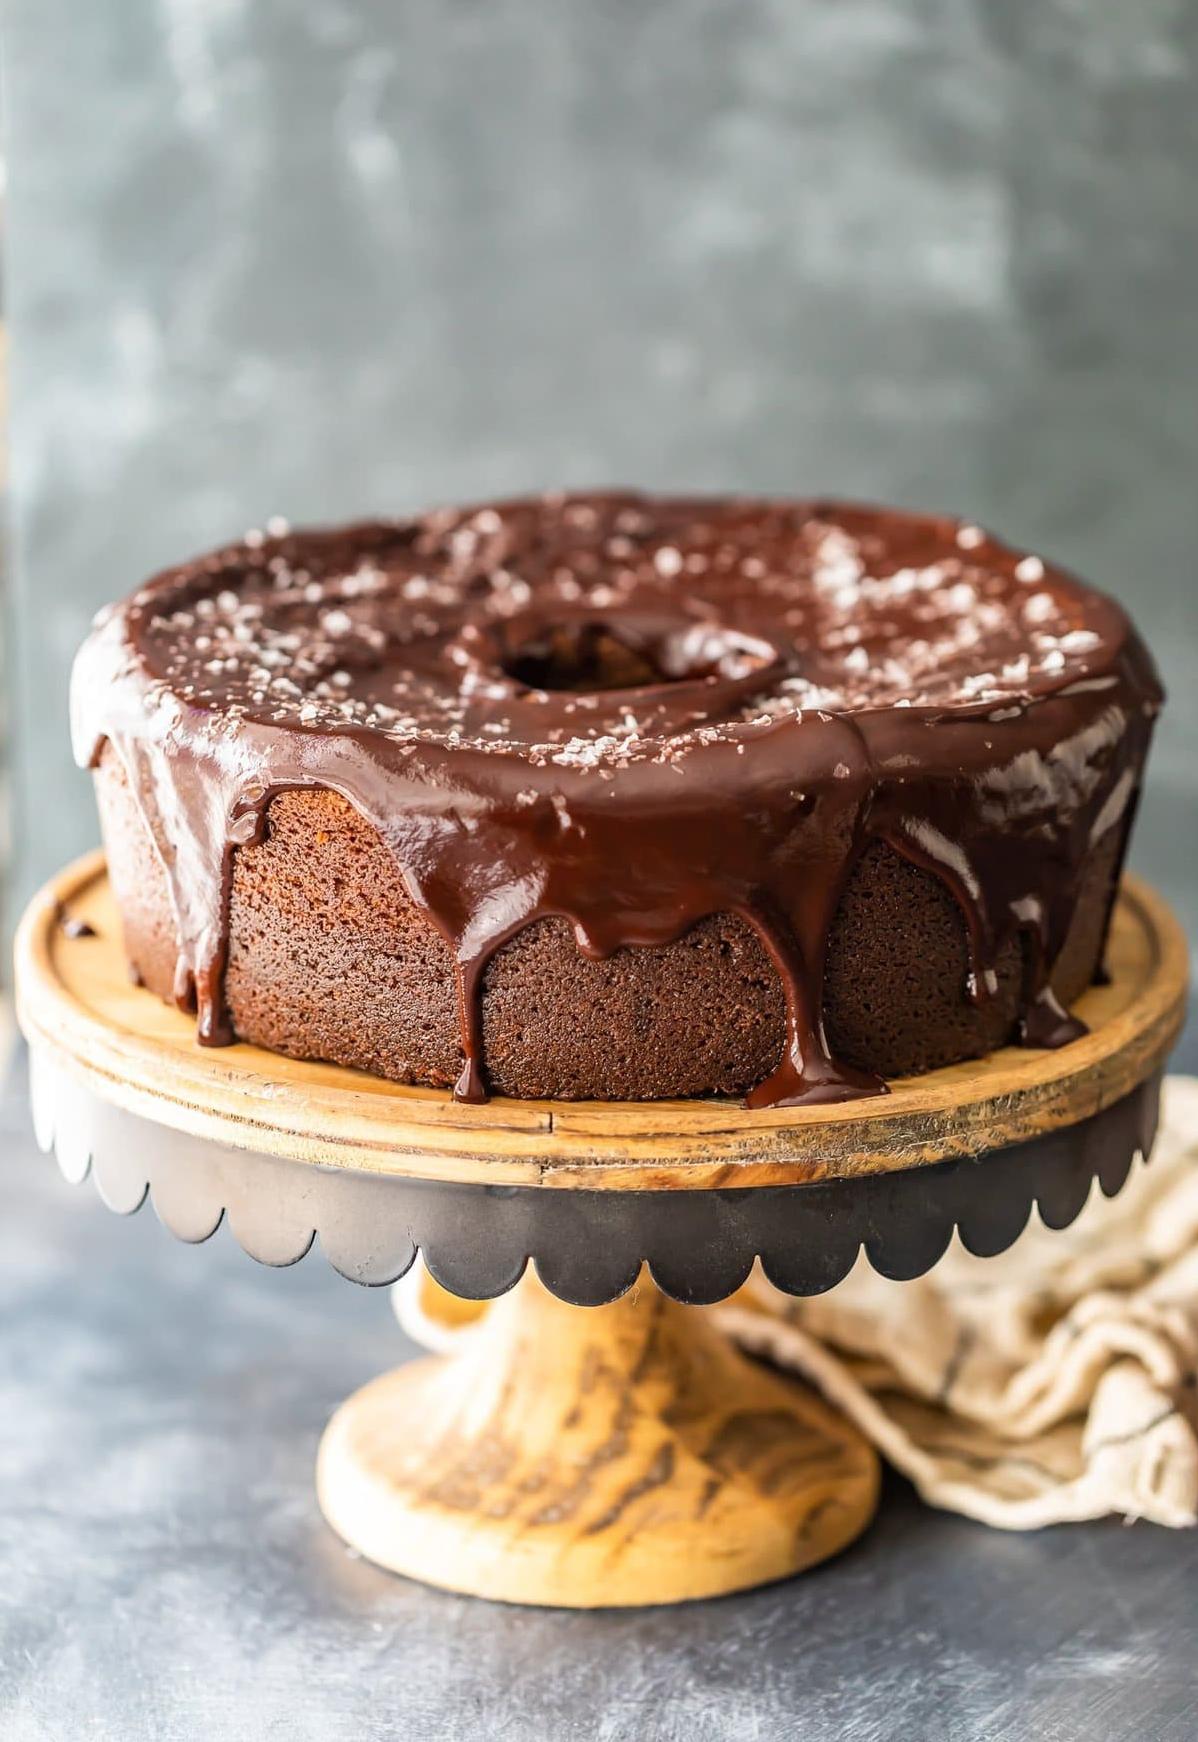  The rich chocolate ganache is drizzled perfectly over the top of the cake.